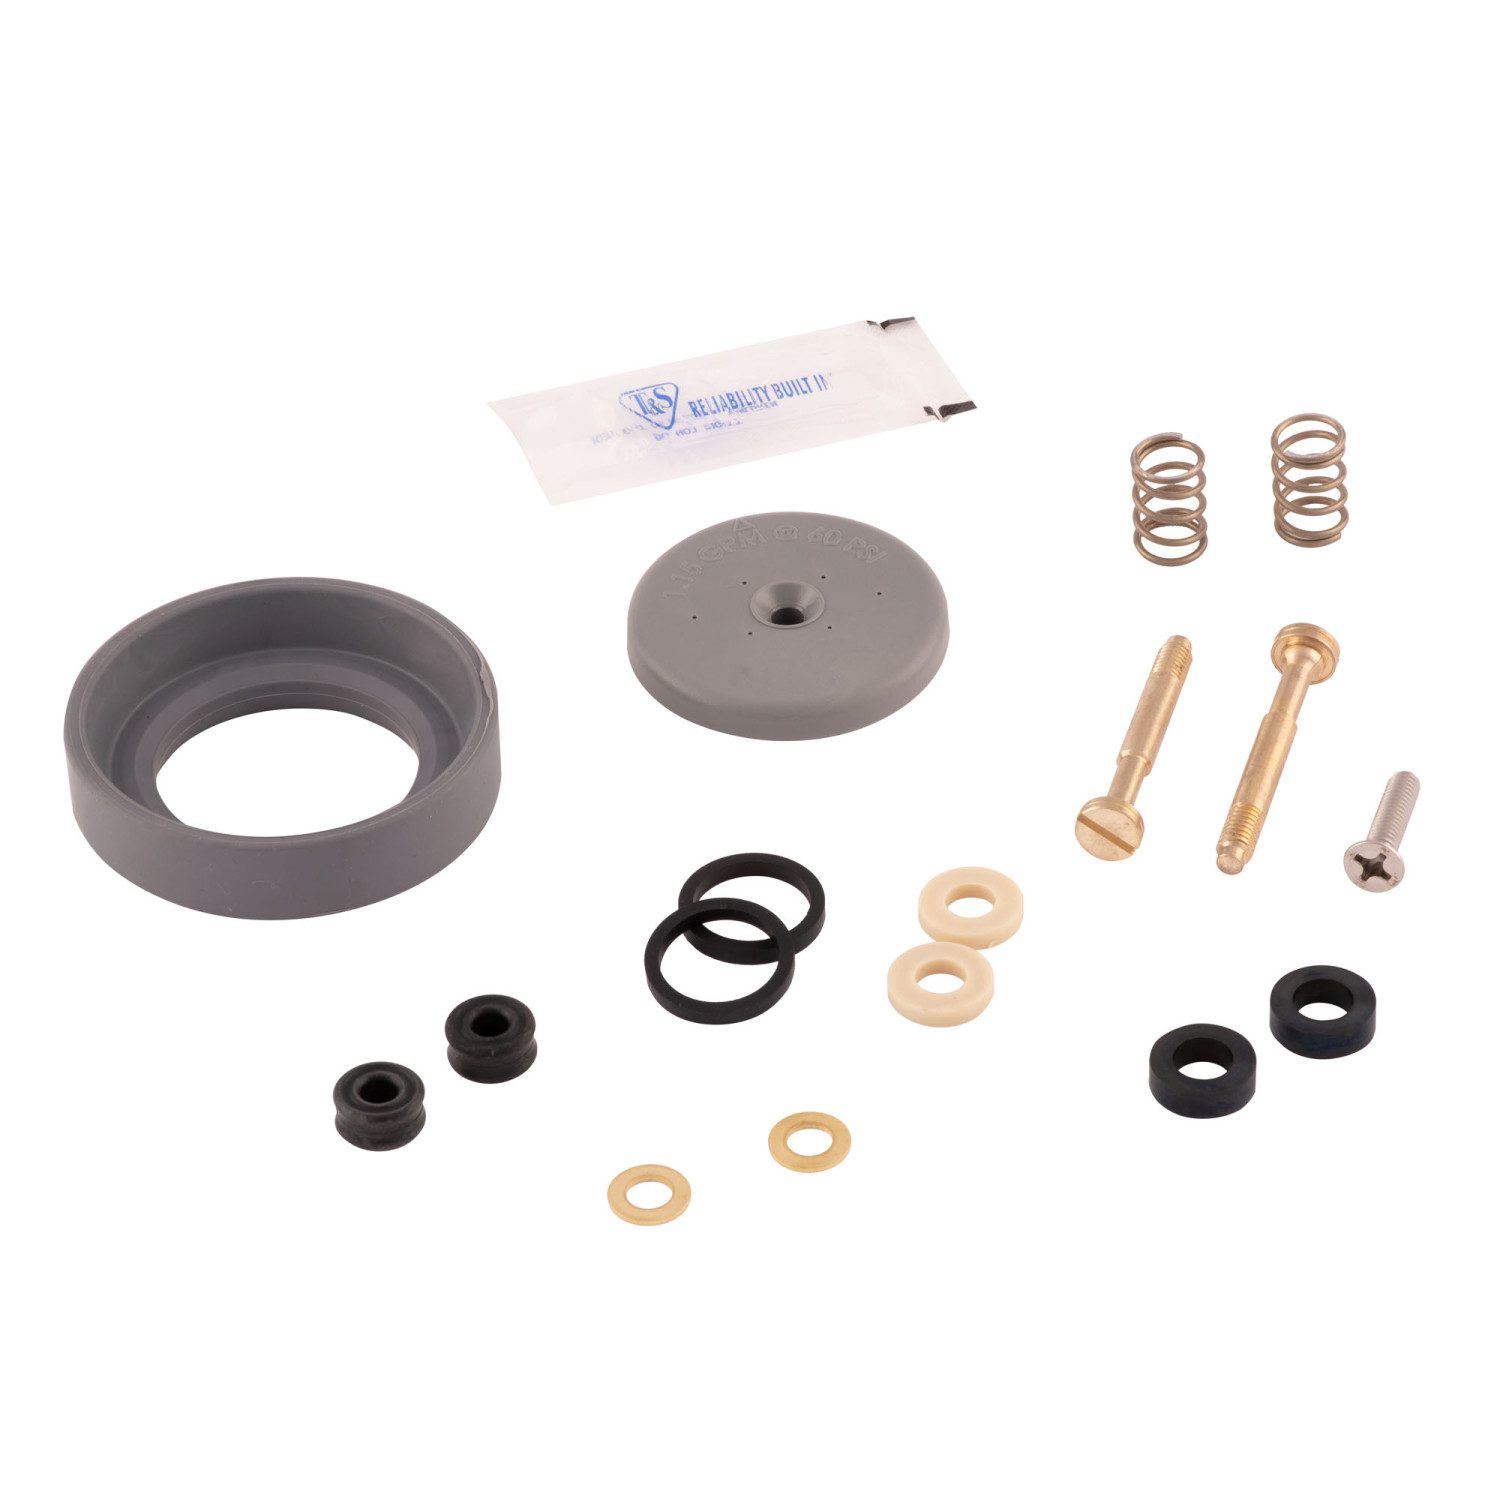 T&S B-10K Parts Kit for B-0107 Spray Valve (Gray) to ensure GPM output accuracy. 